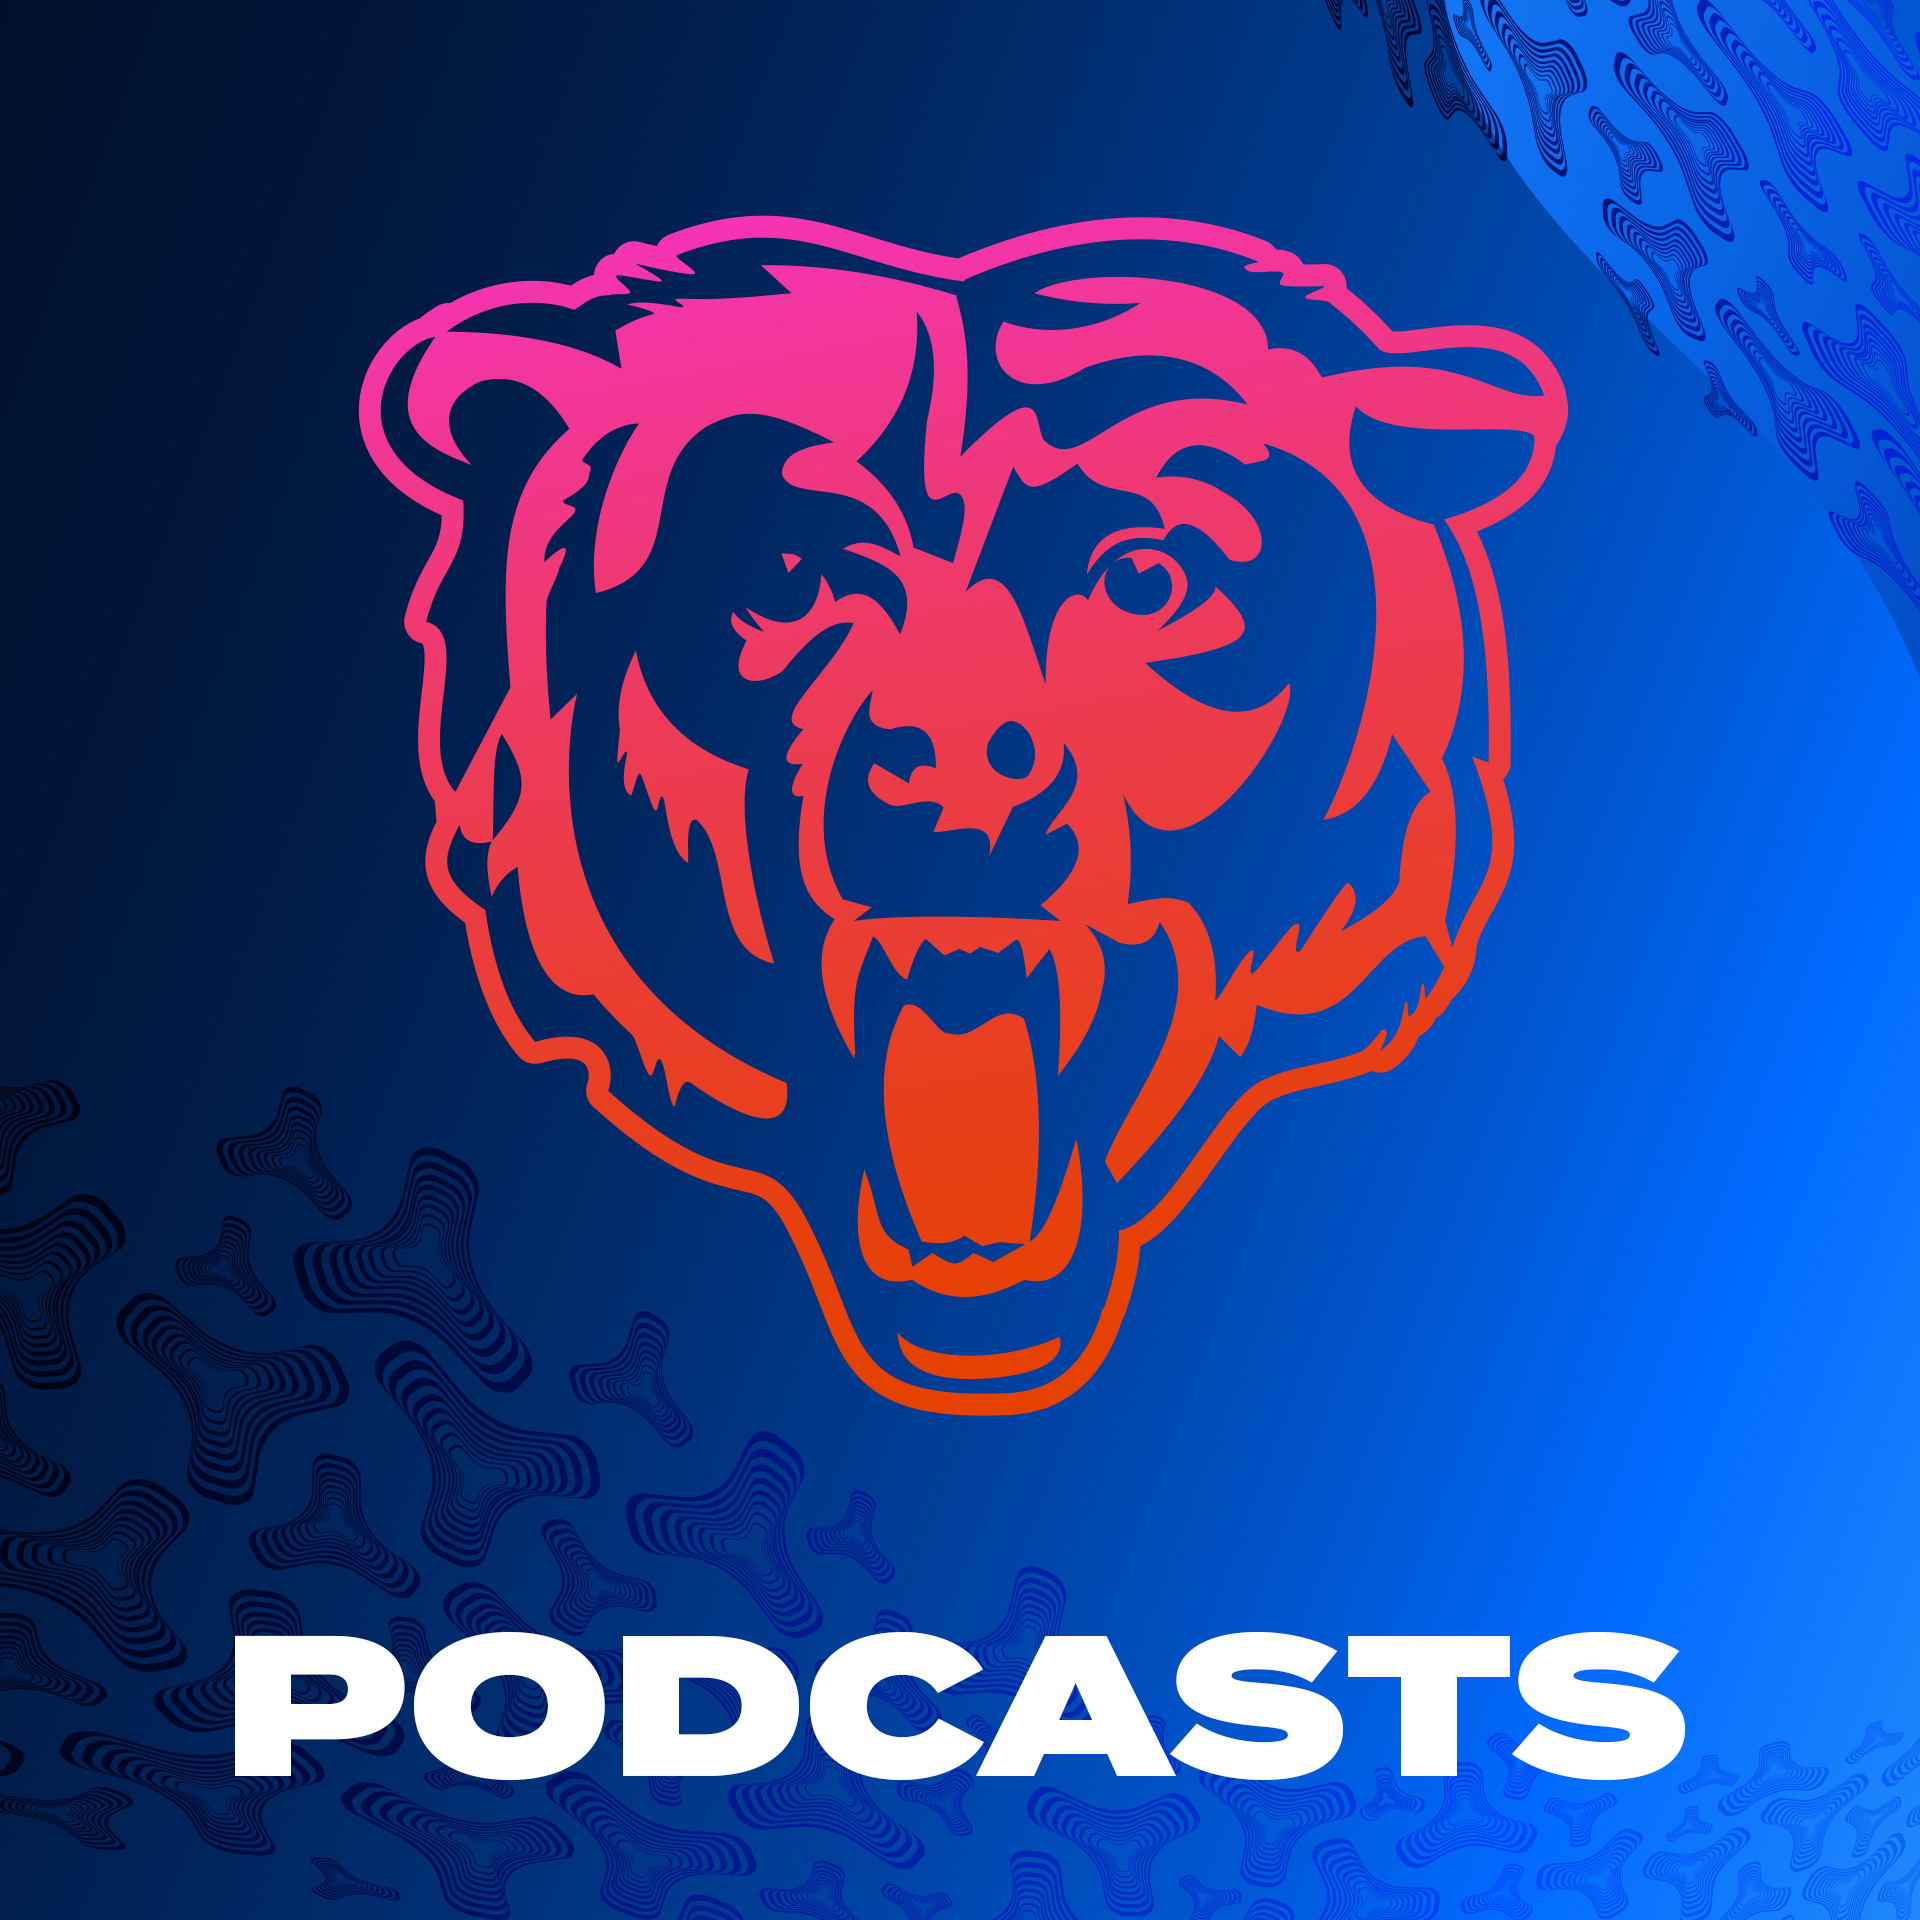 Stacey Dales breaks down NFL Combine | Bears, etc. Podcast